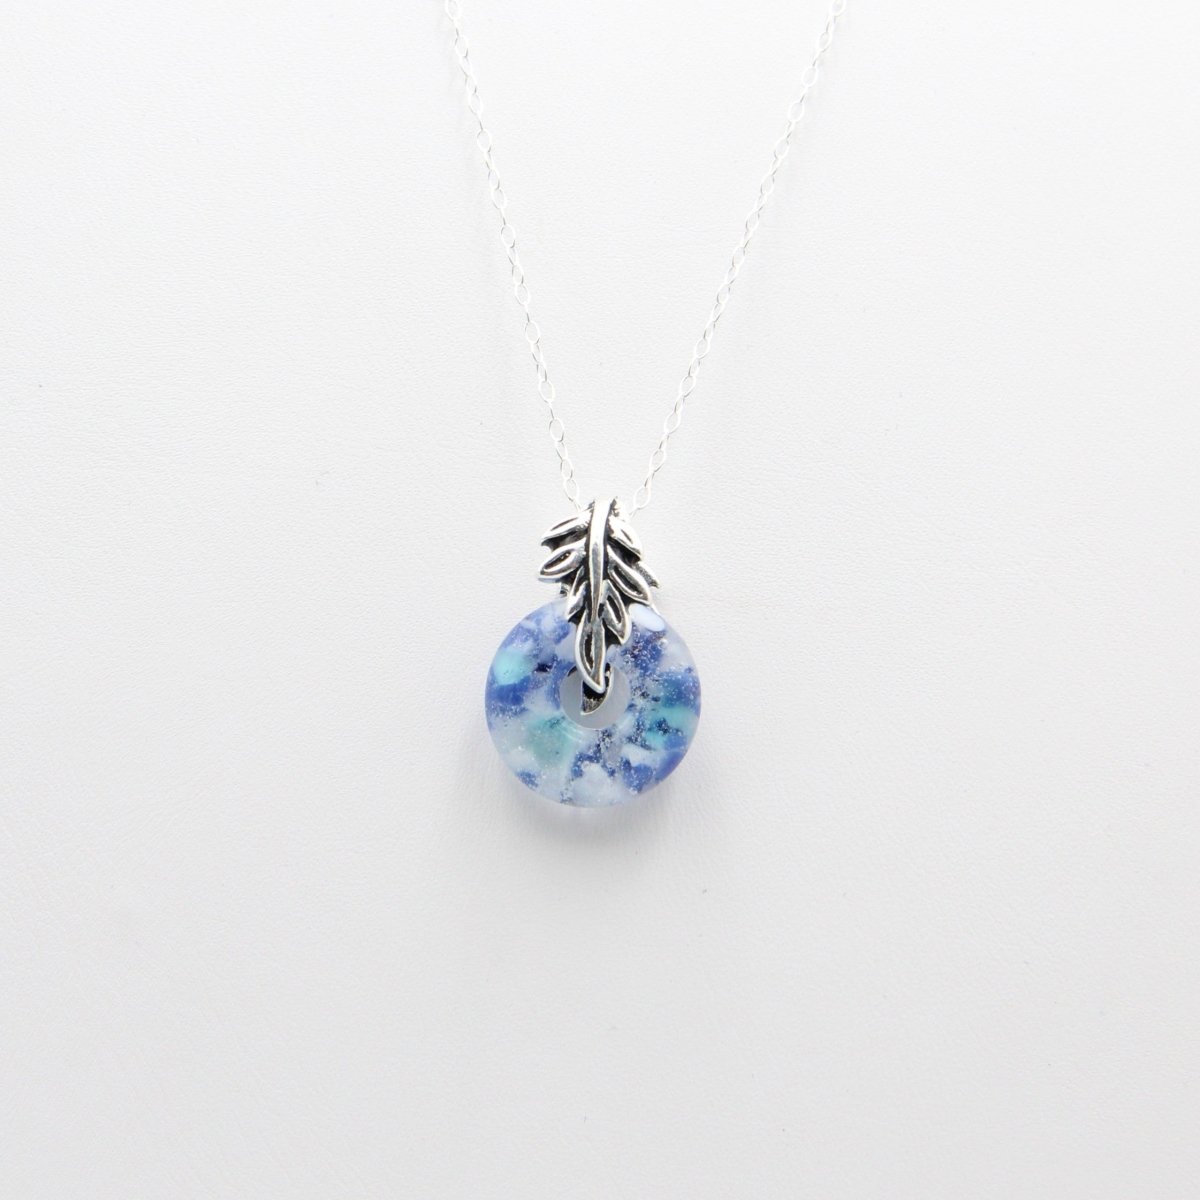 Delicate Speckled Blue and White Glass Pendant